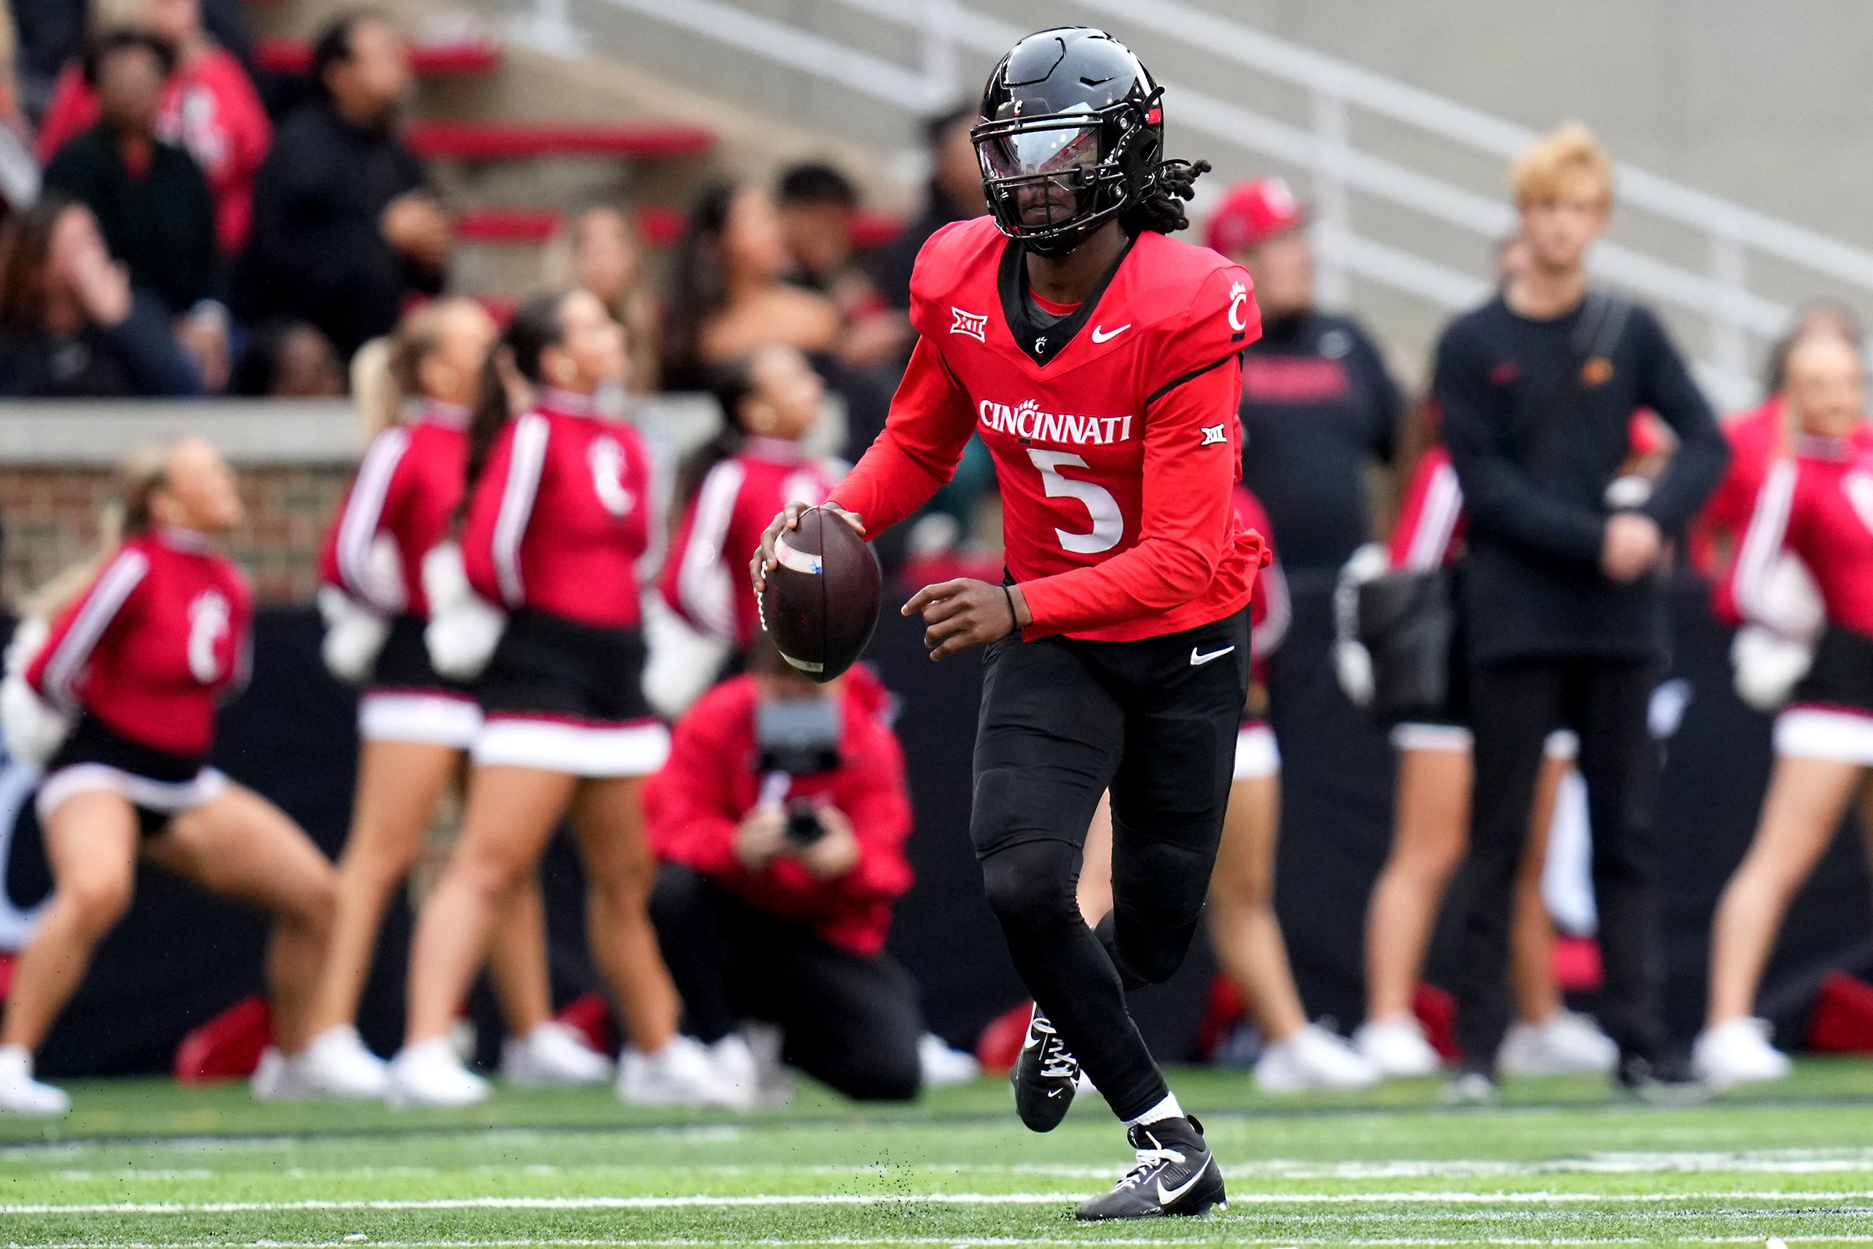 Fresh off of a bye, the Bearcats fall by three scores to the visiting Iowa St. Cyclones on a disappointing Homecoming Saturday in Cincinnati.